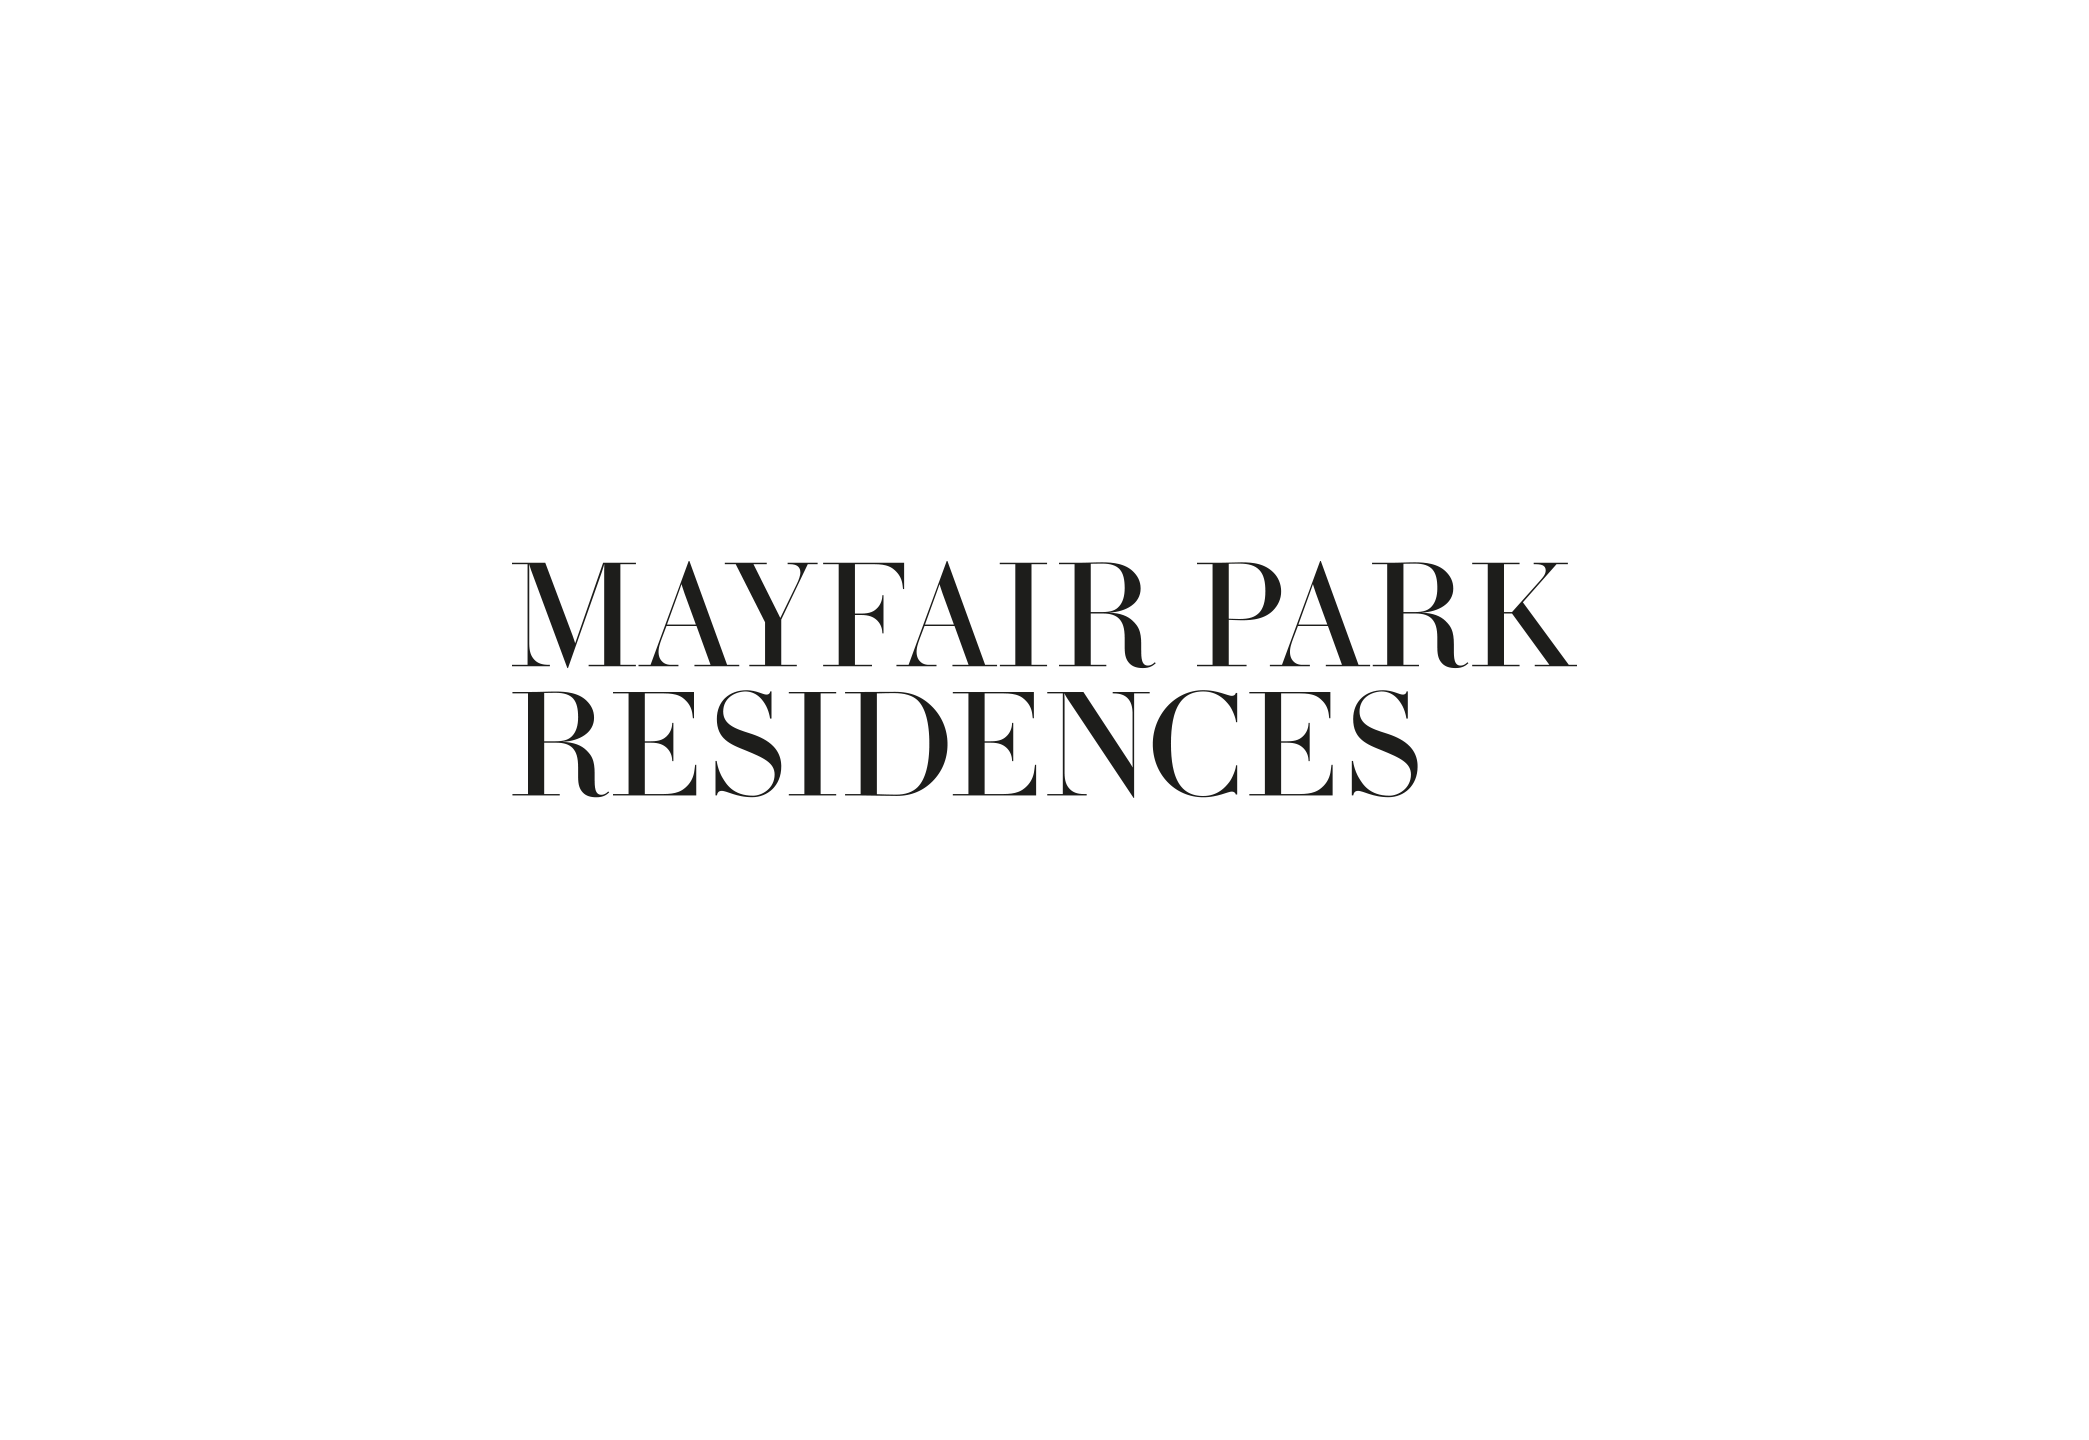 Identity and brand book for Mayfair Park Residences